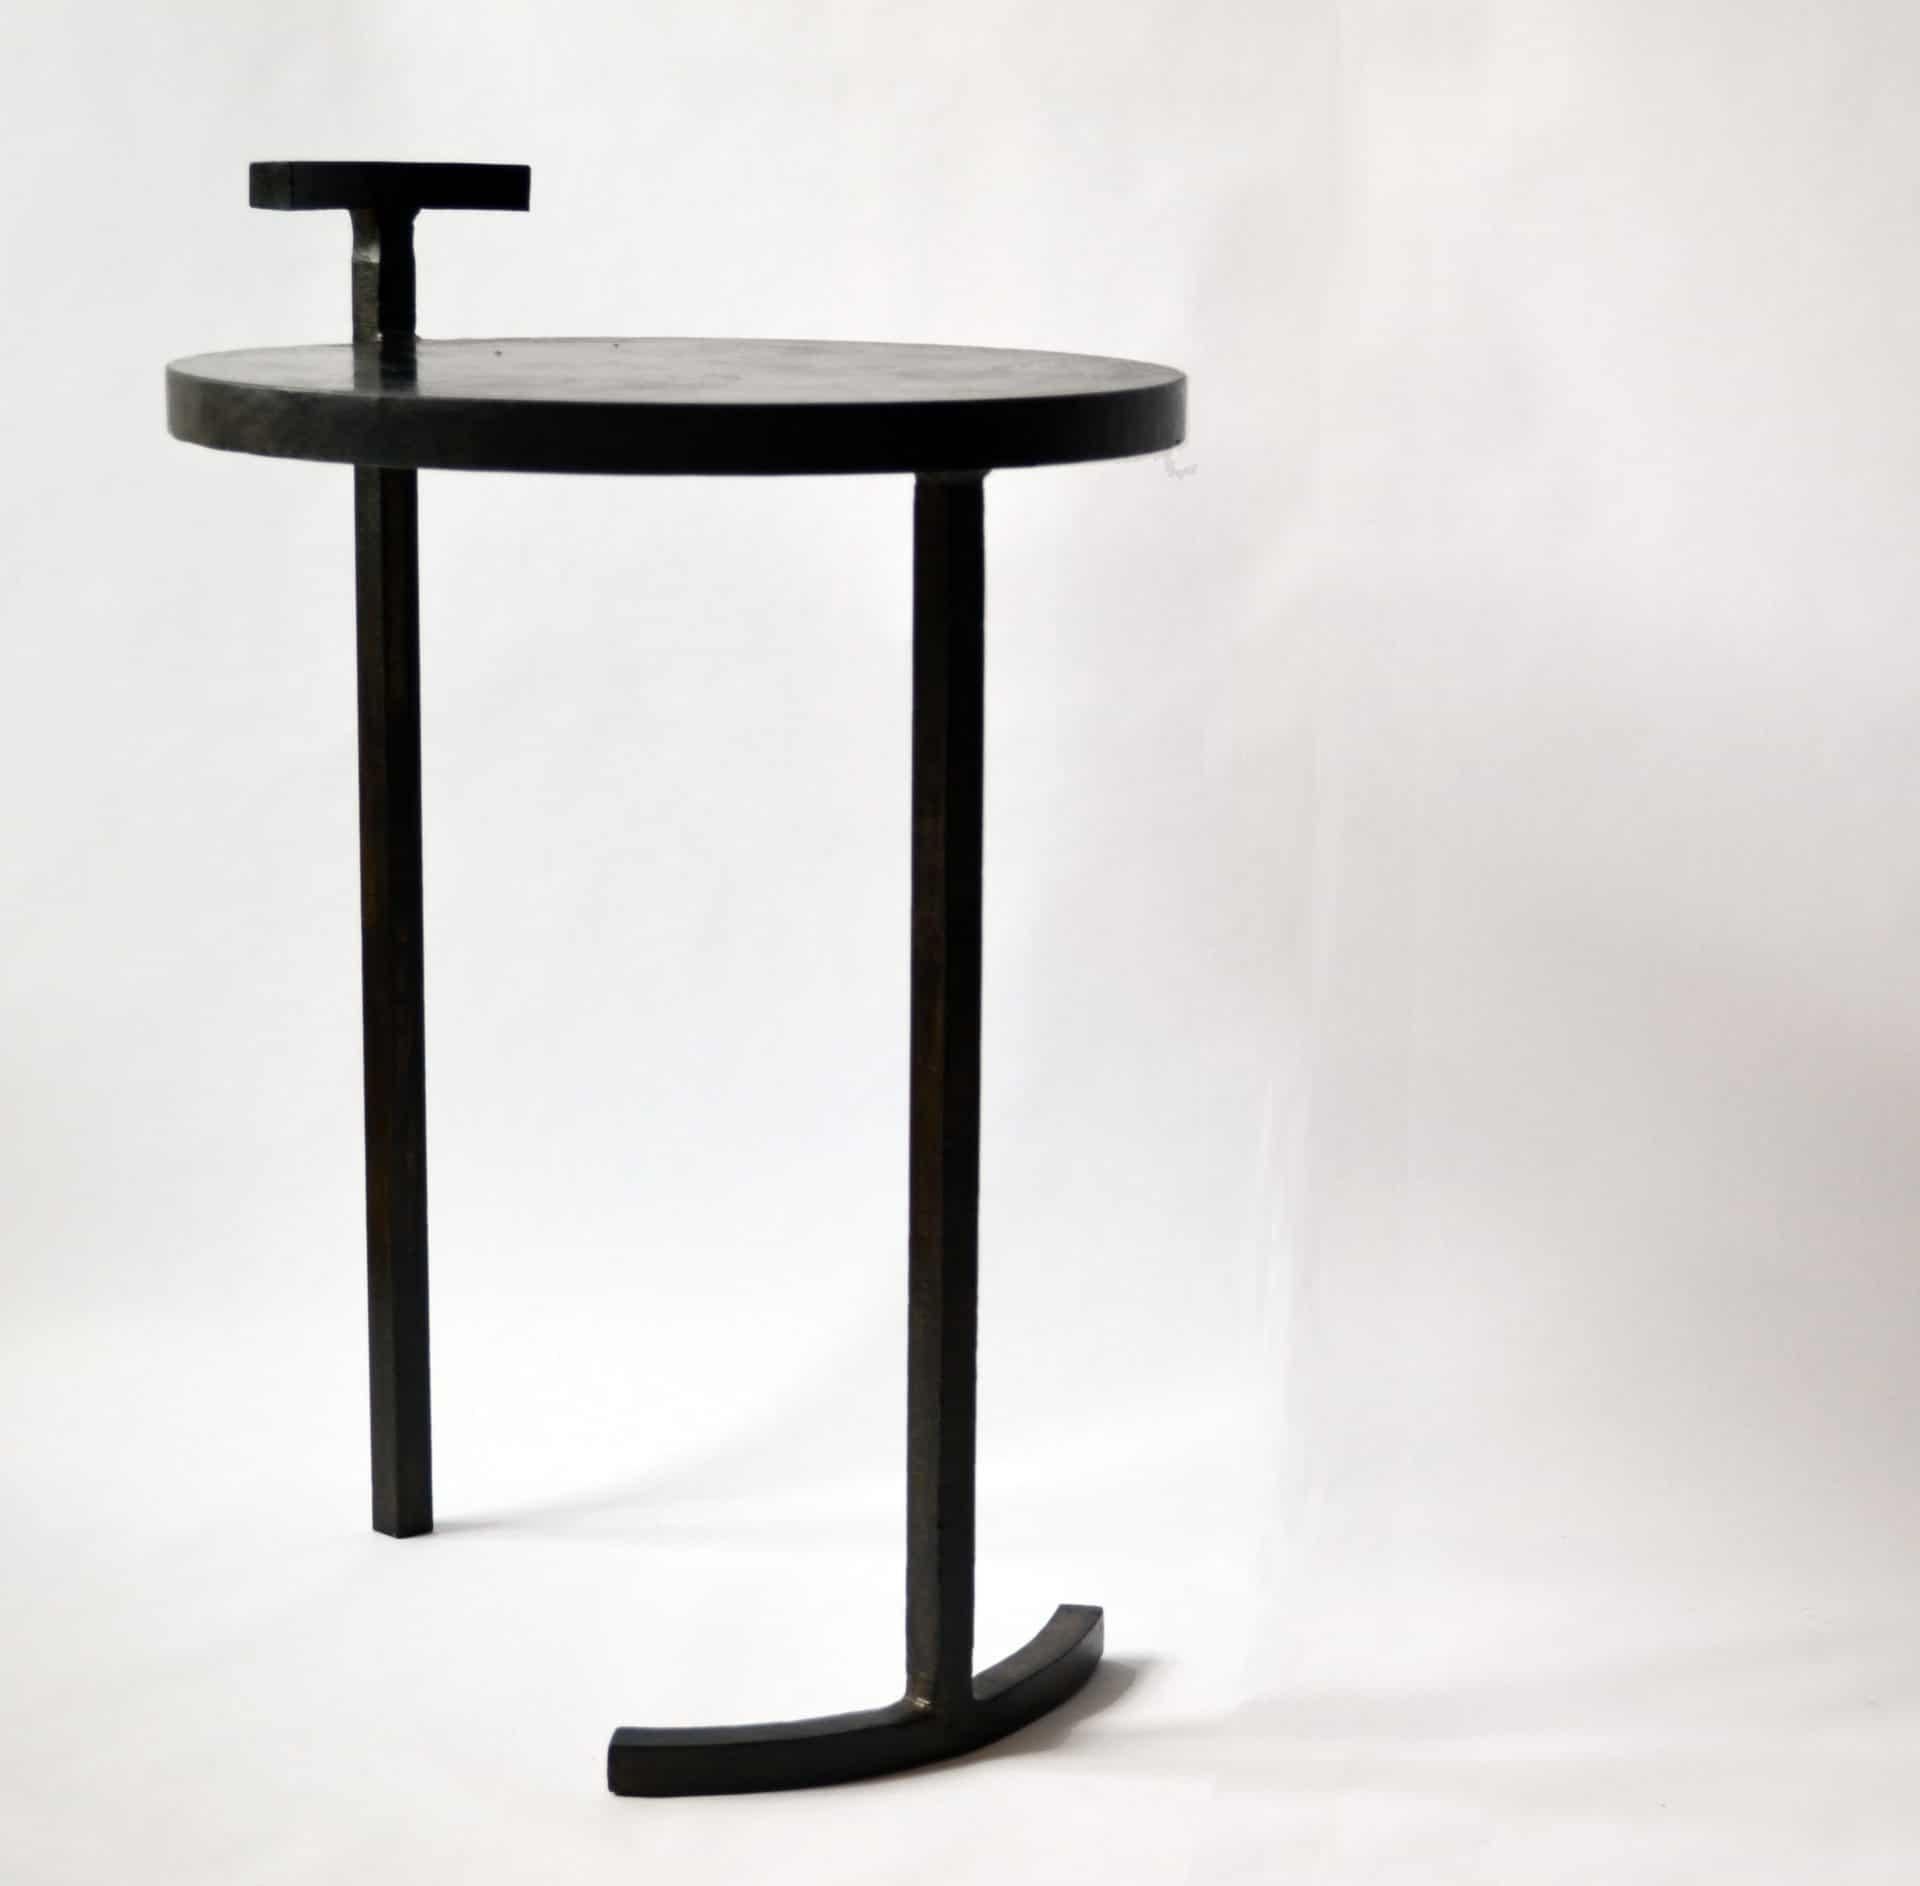 A striking design. This side table has only two legs.

This side table is made from cast blackened and waxed steel. A uniquely designed frame allows a 1 inch thick, cast steel, circular top to balance on two legs. This is the first table designed